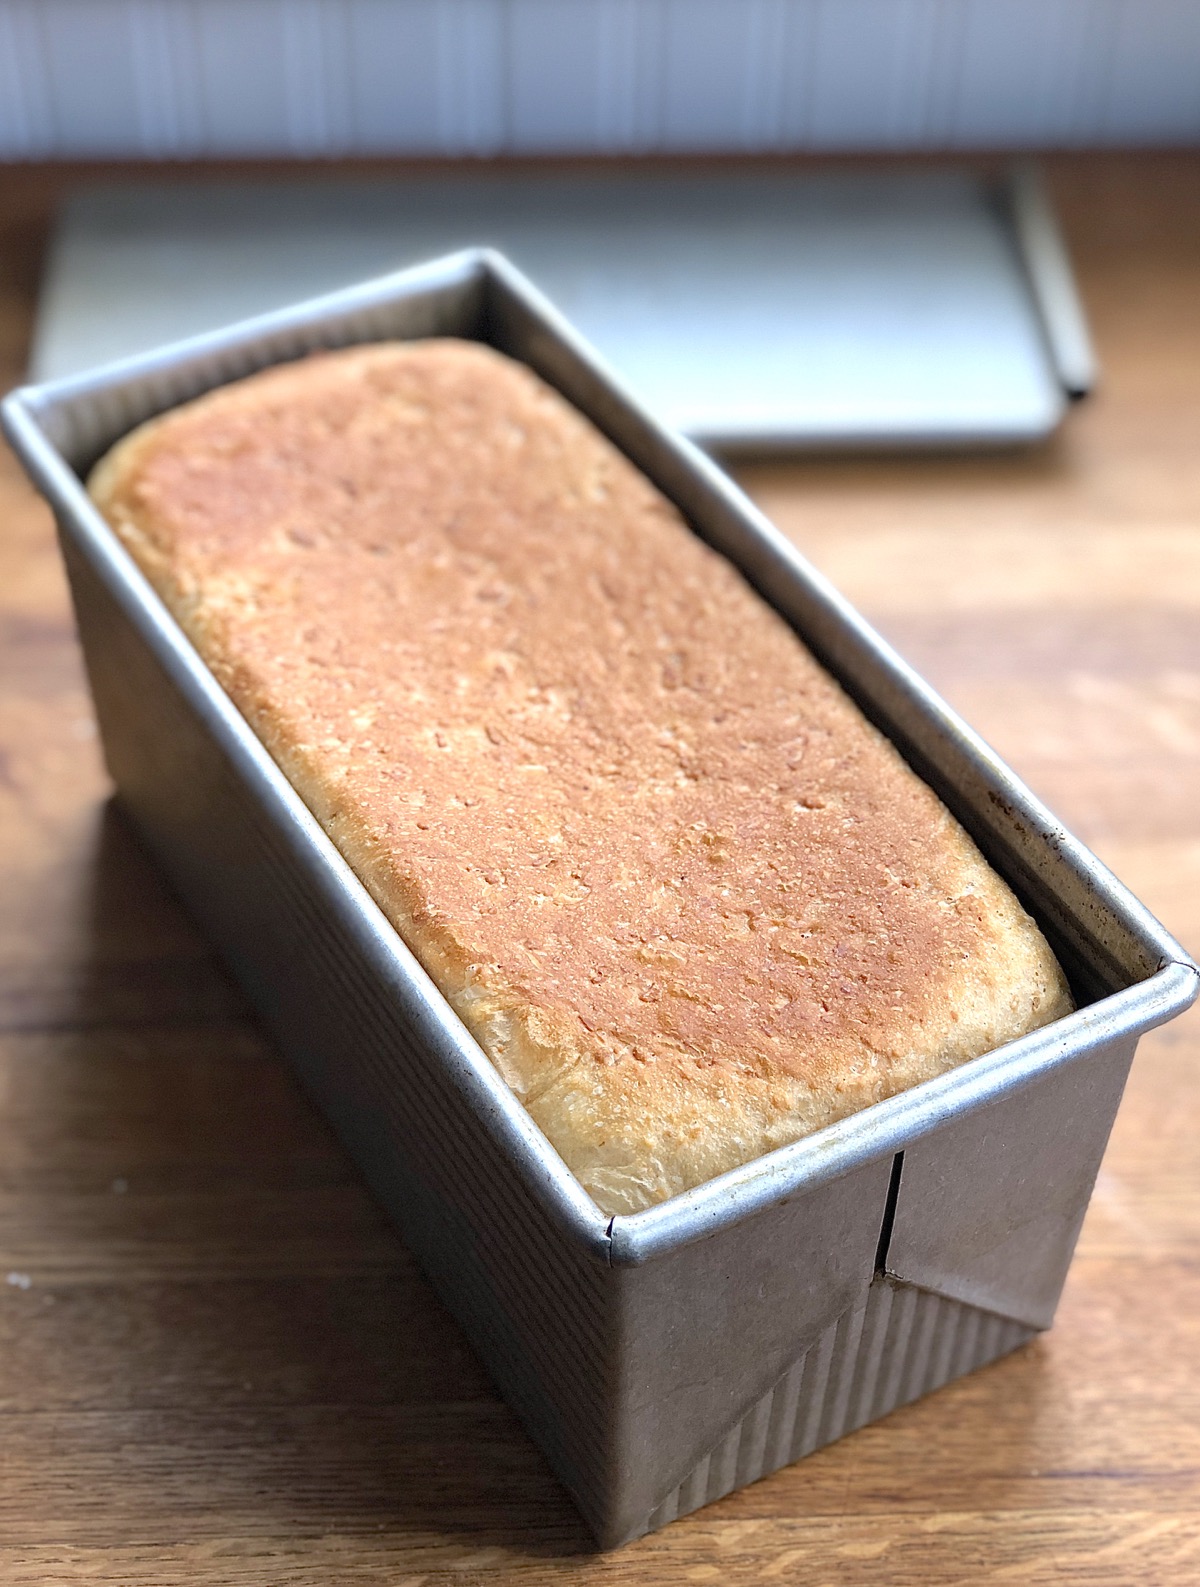 Just-baked oatmeal bread in a pain de mie loaf pan